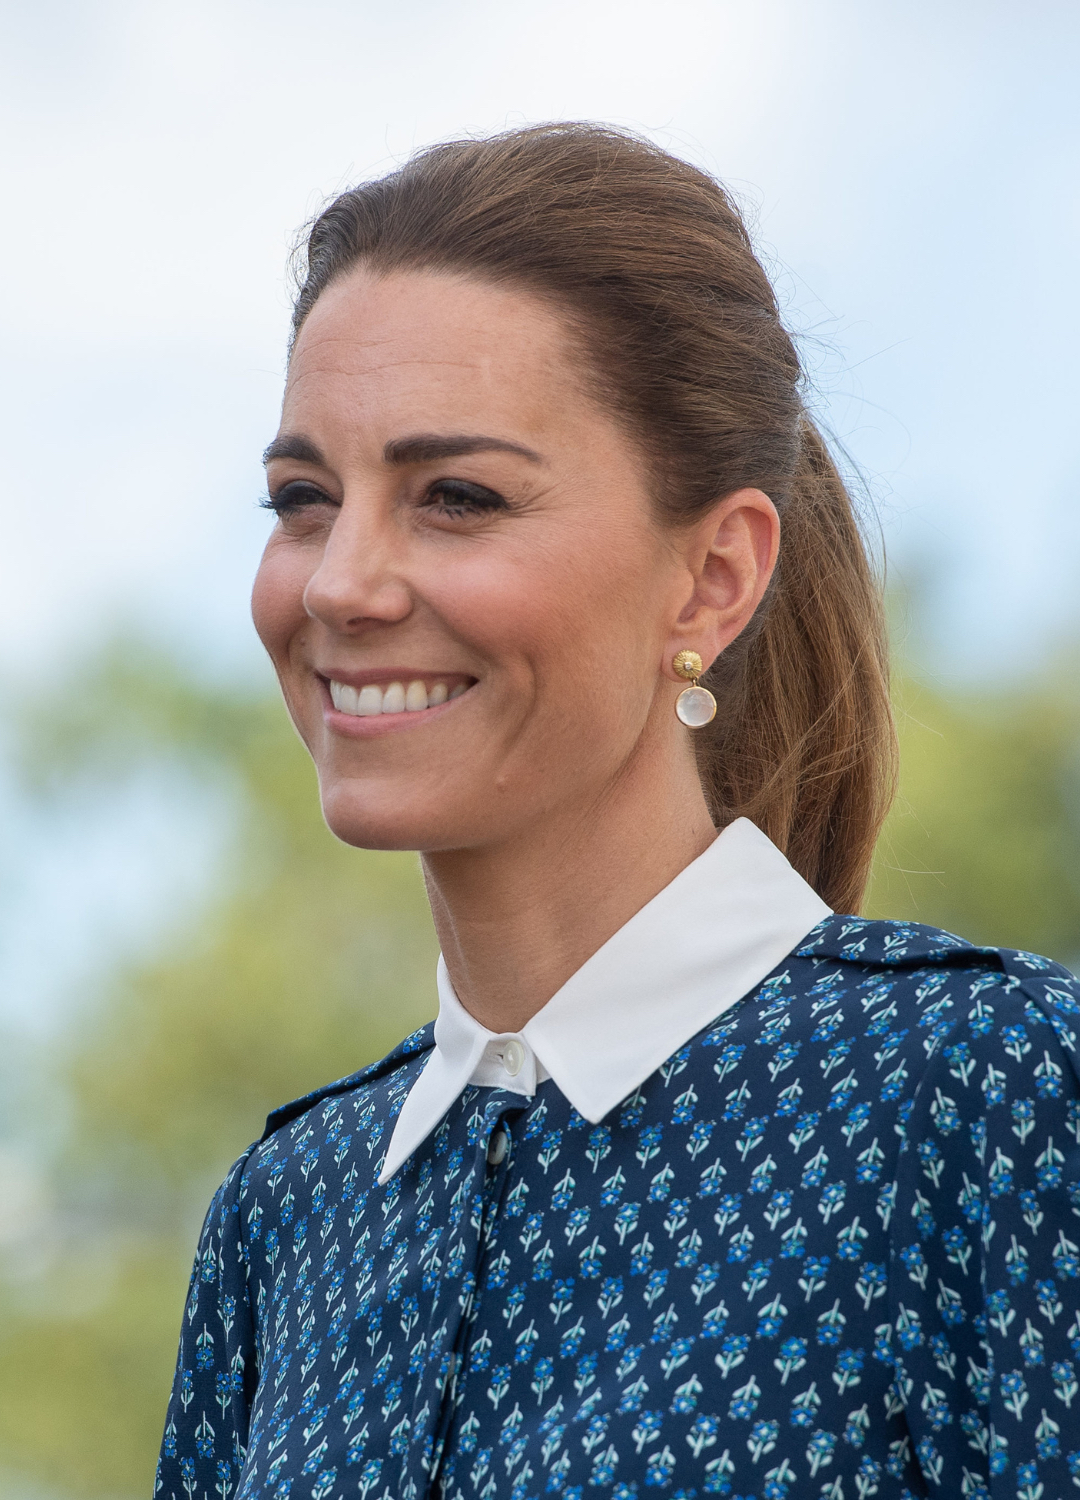 Catherine, Duchess of Cambridge visits Queen Elizabeth Hospital in King's Lynn as part of the NHS birthday celebrations on July 5, 2020 in Norfolk, England